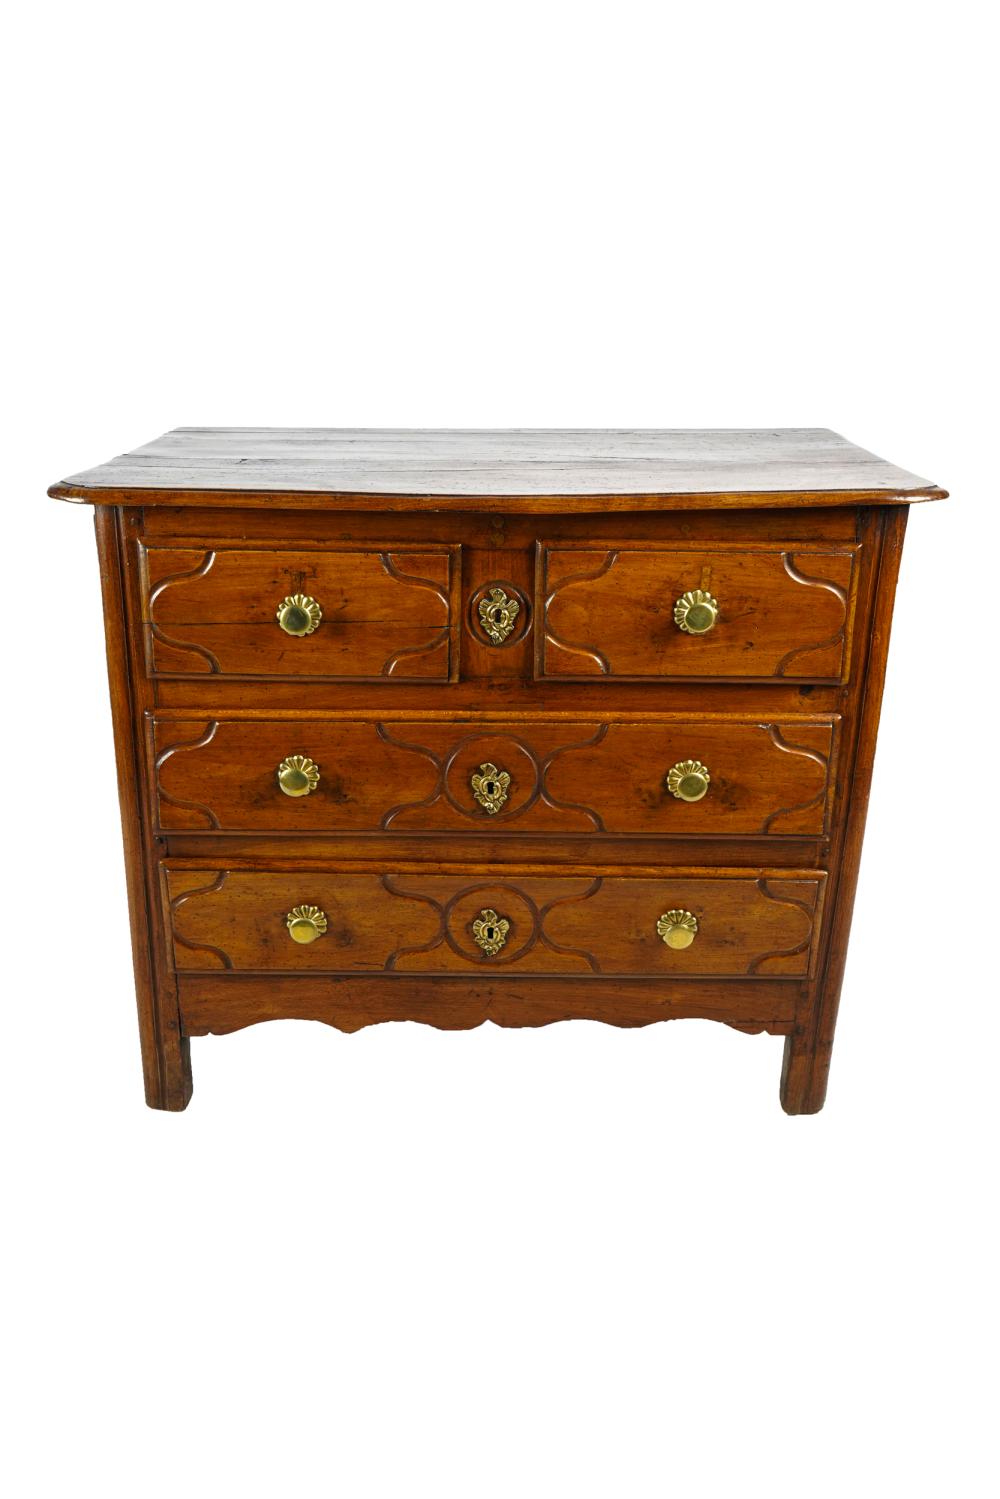 FRENCH PROVINCIAL WALNUT COMMODEwith 3379f2